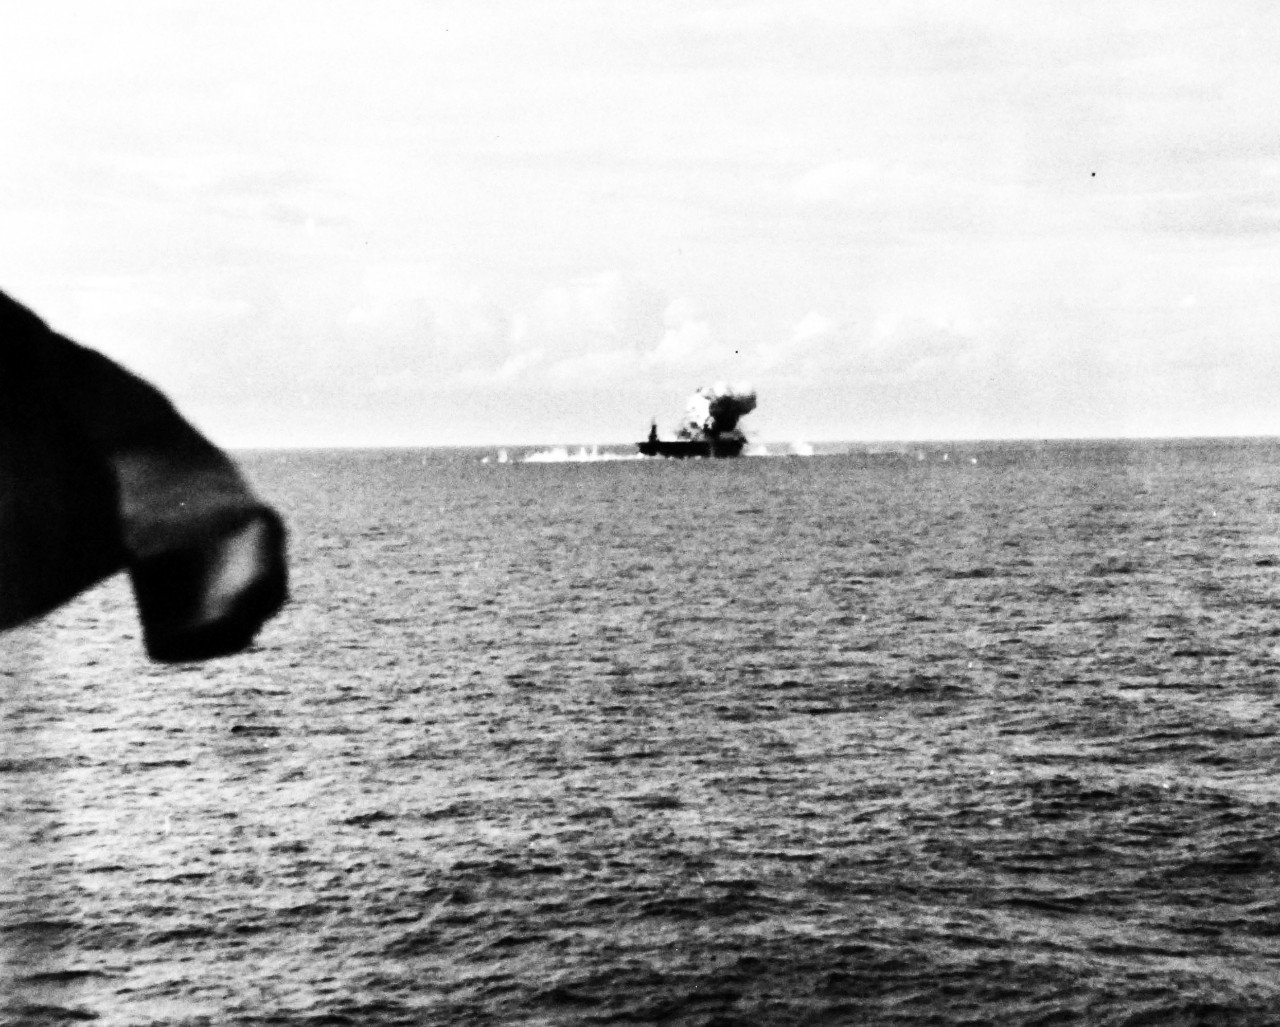 80-G-270667:  Battle off Samar, Japanese Kamikaze, October 25, 1944.   Japanese suicide plane attacking USS Santee (CVE-29), hitting after end of flight deck off Leyte Gulf, Philippines, as seen from USS Suwannee (CVE-27), 25 October 1944.  Official U.S. Navy Photograph, now in the collections of the National Archives.   (2014/4/24). 